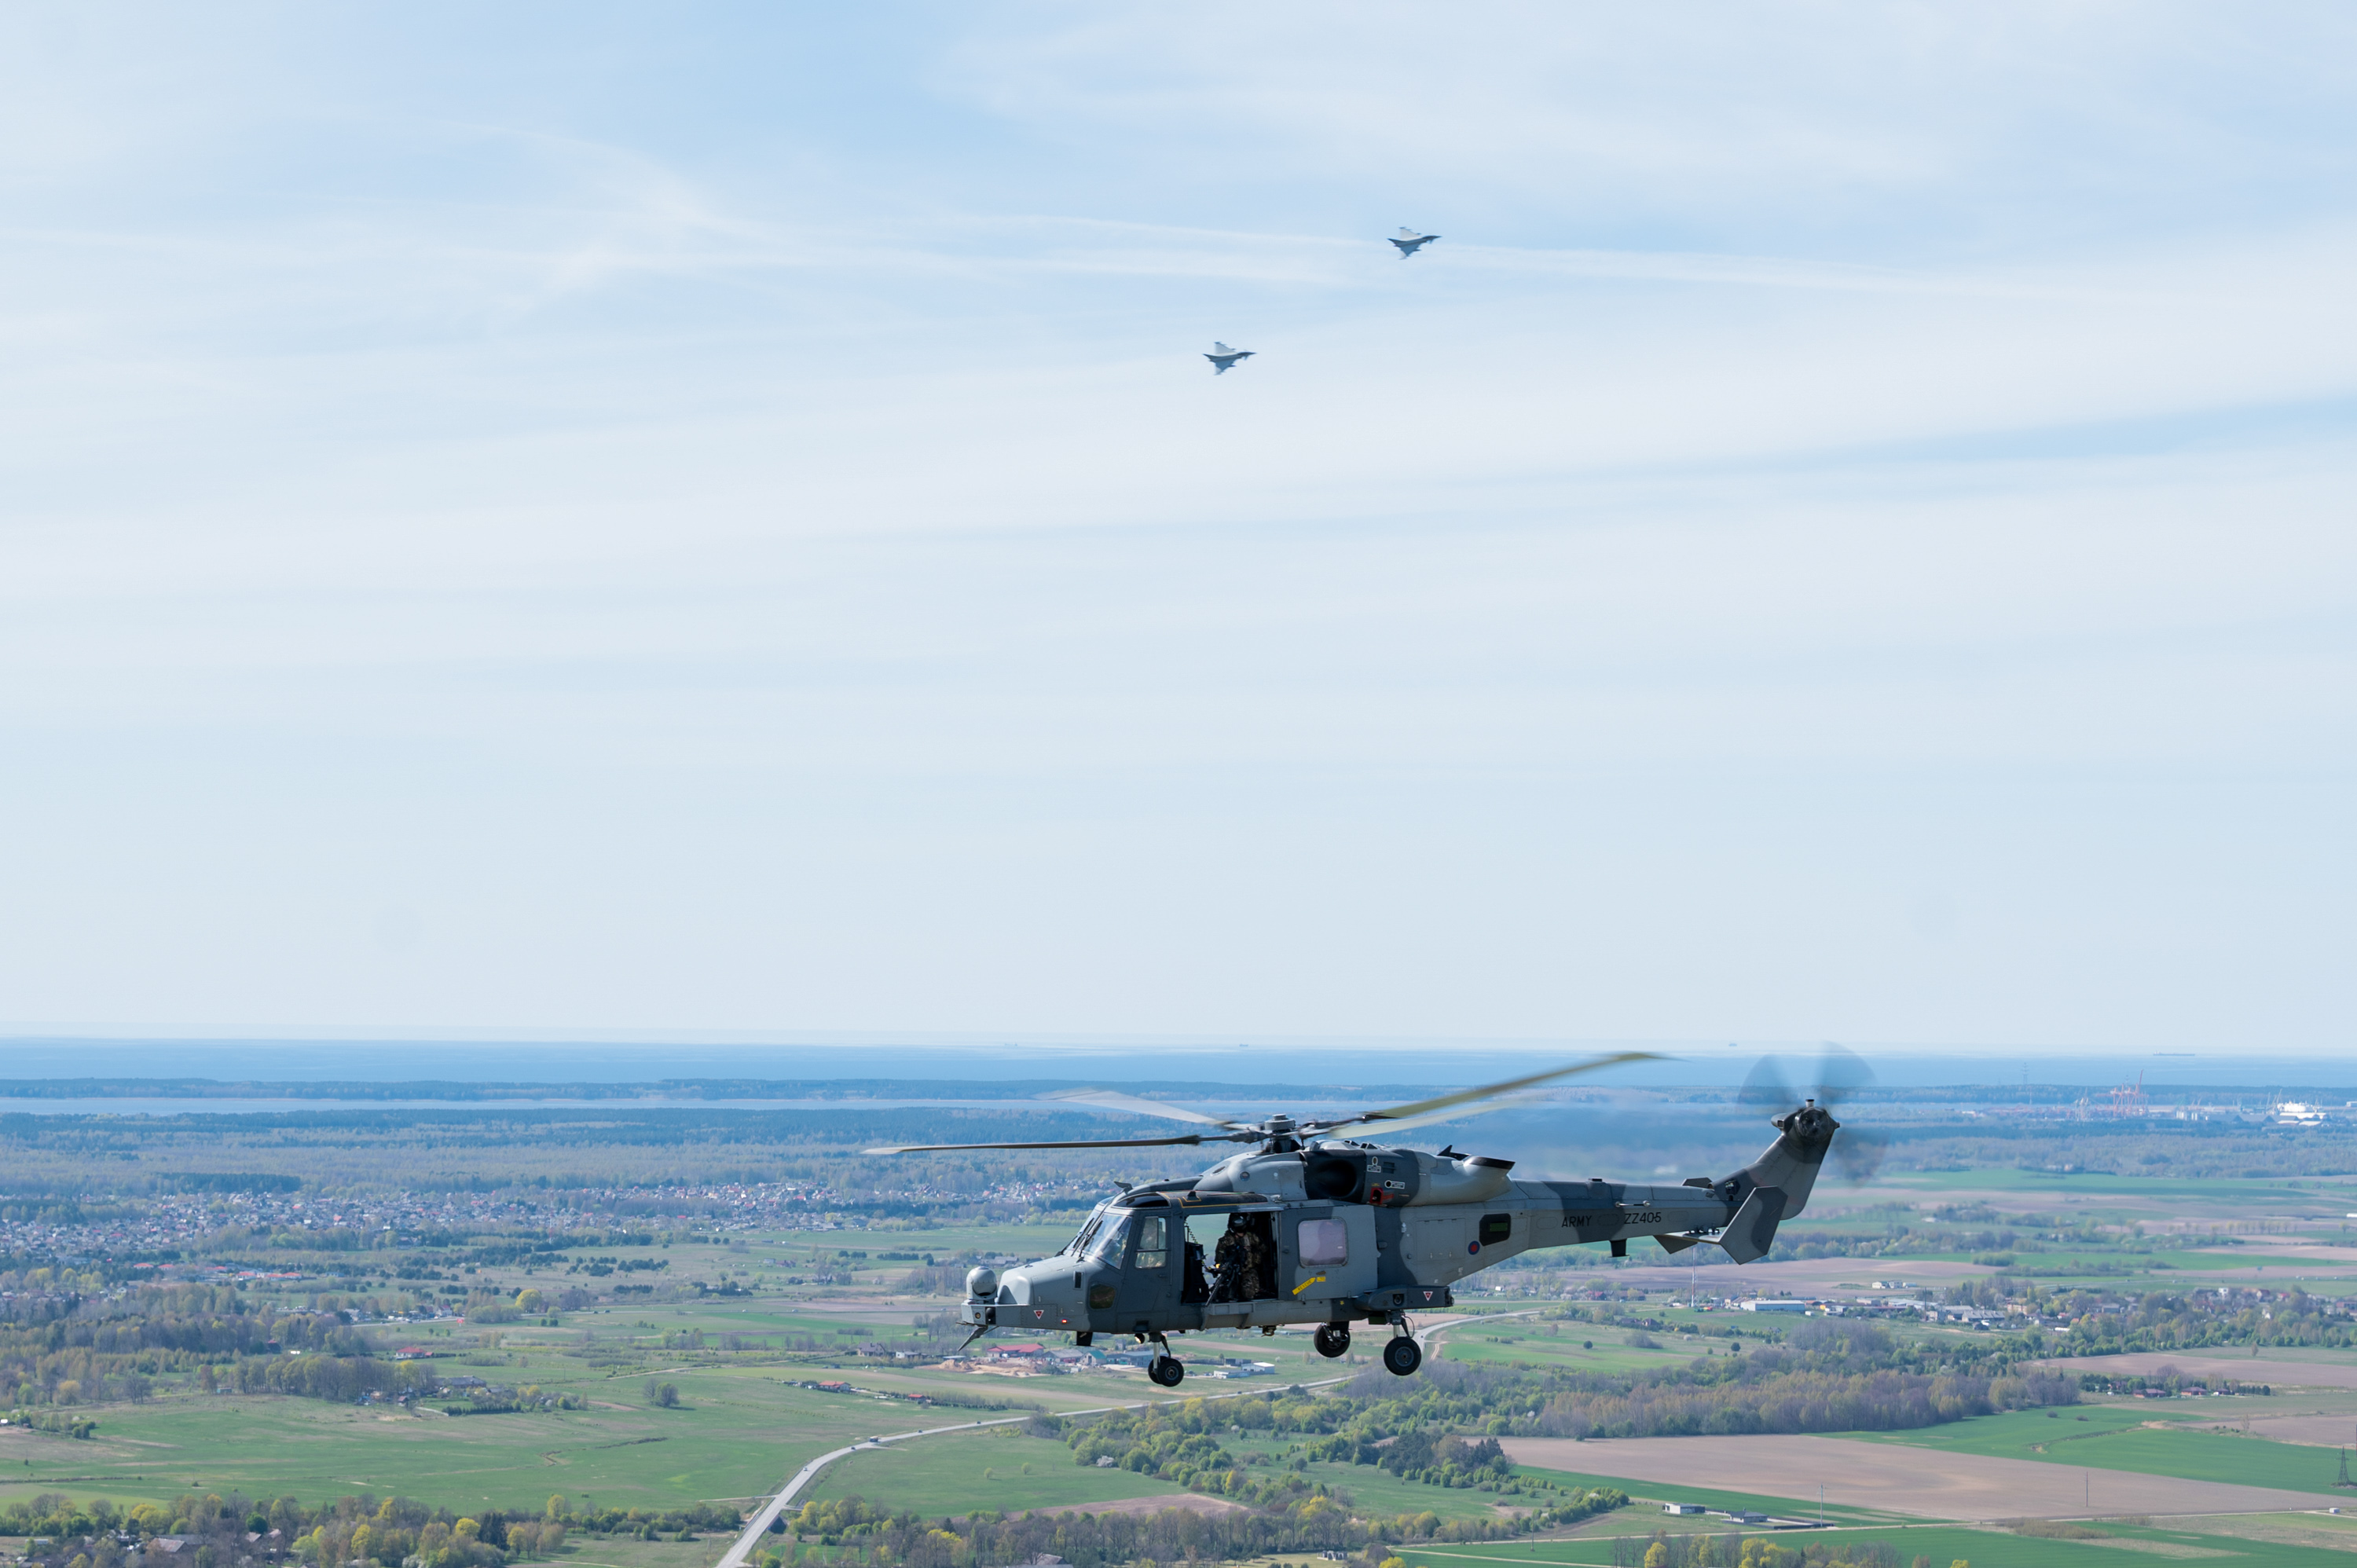 Two RAF Typhoons and a British Army Wildcat helicopter in flight.